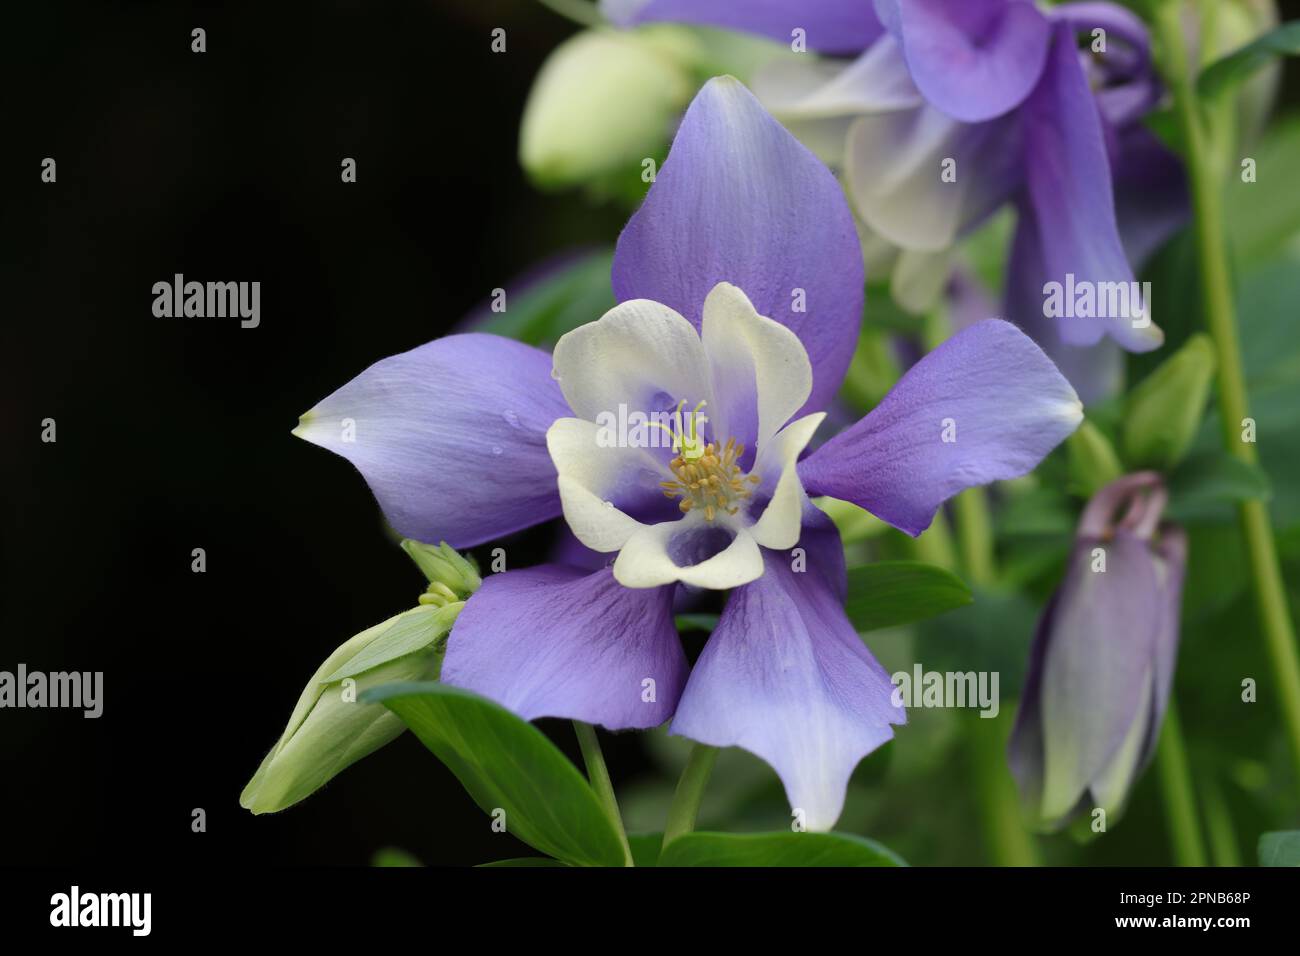 close-up of a pretty columbine flower with violet-blue sepals and white petals against a dark blurry background Stock Photo